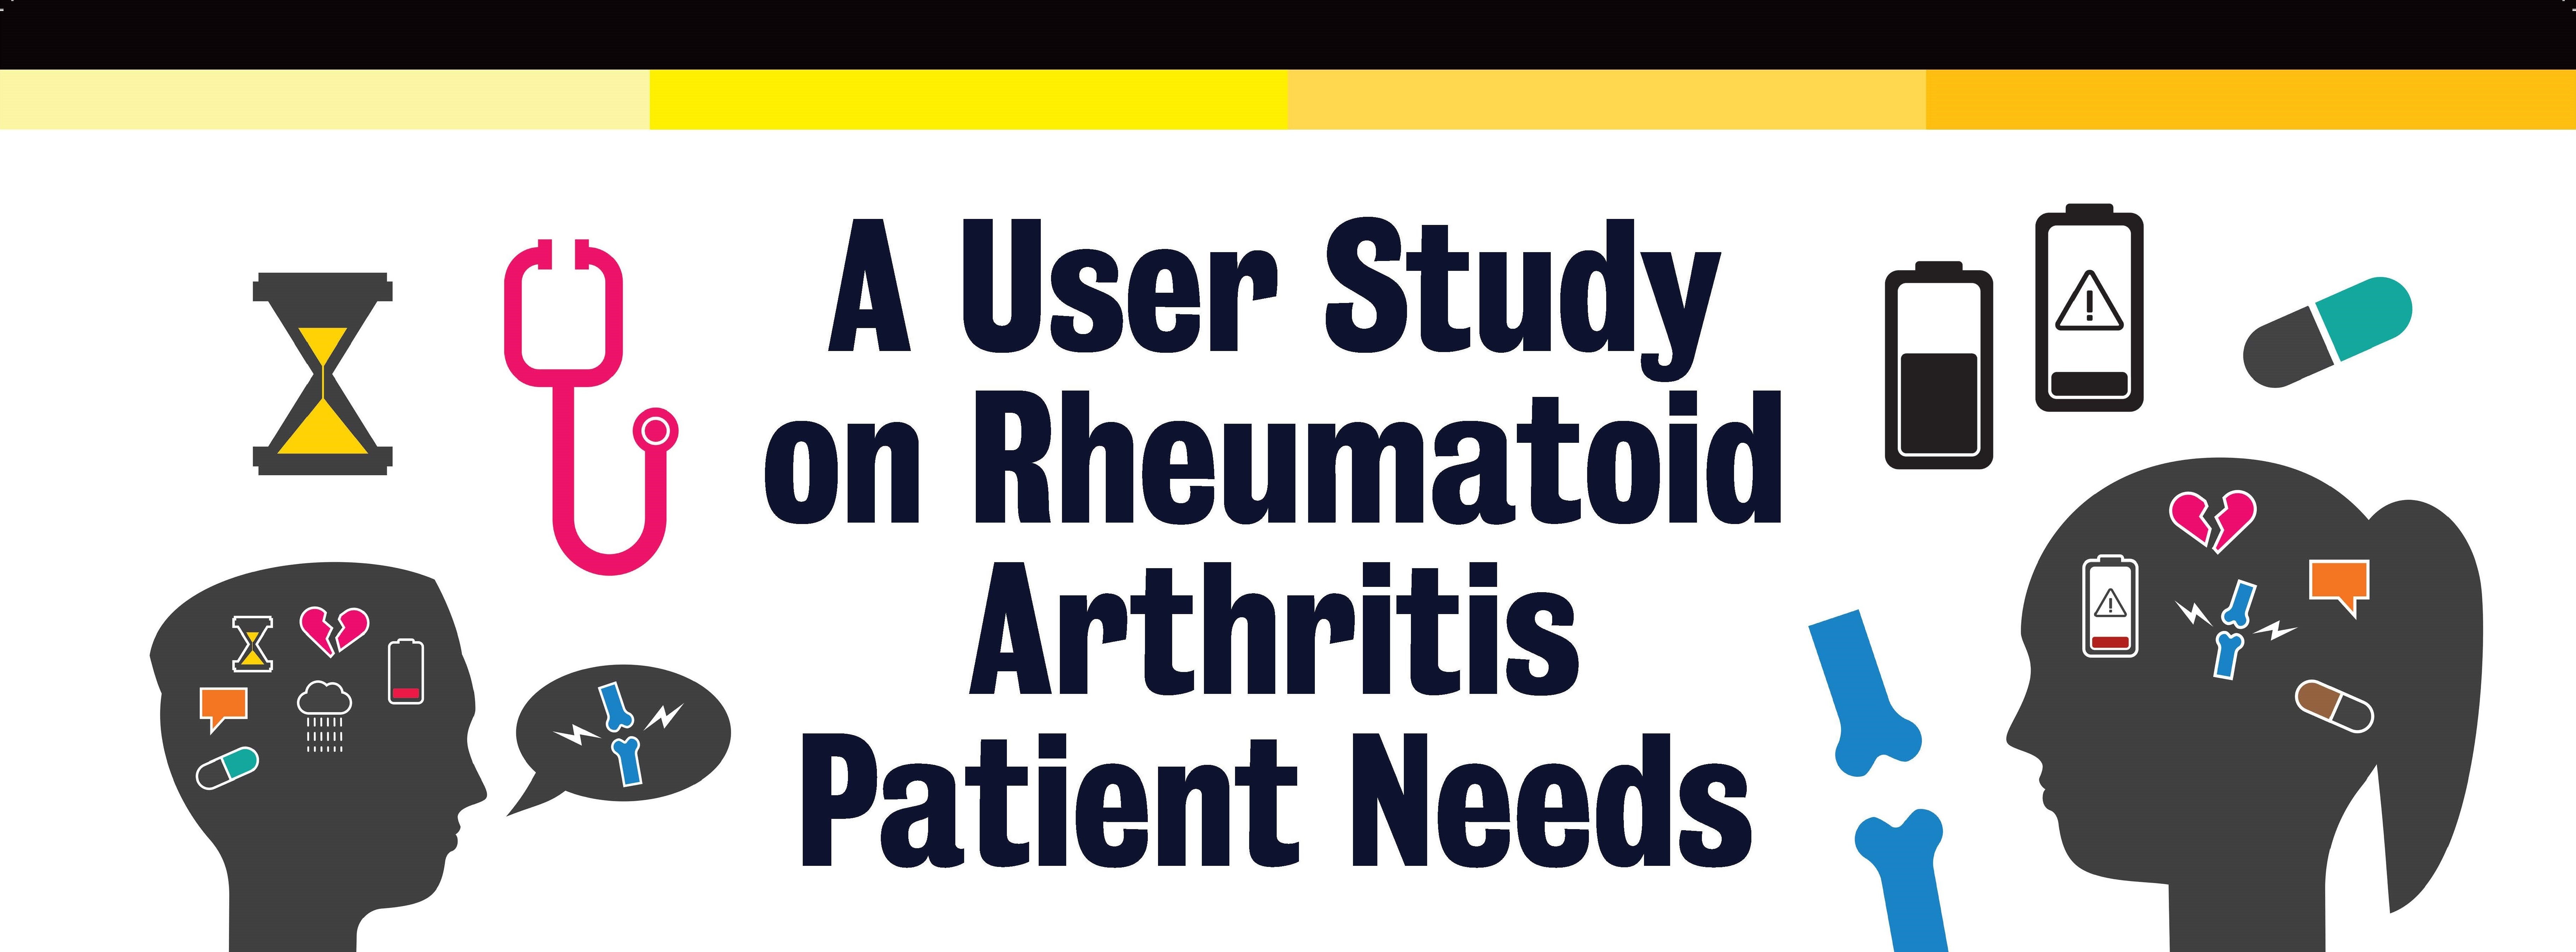 A User Study on Rheumatoid Arthritis Patient Needs poster title with graphic of two heads and medical designs